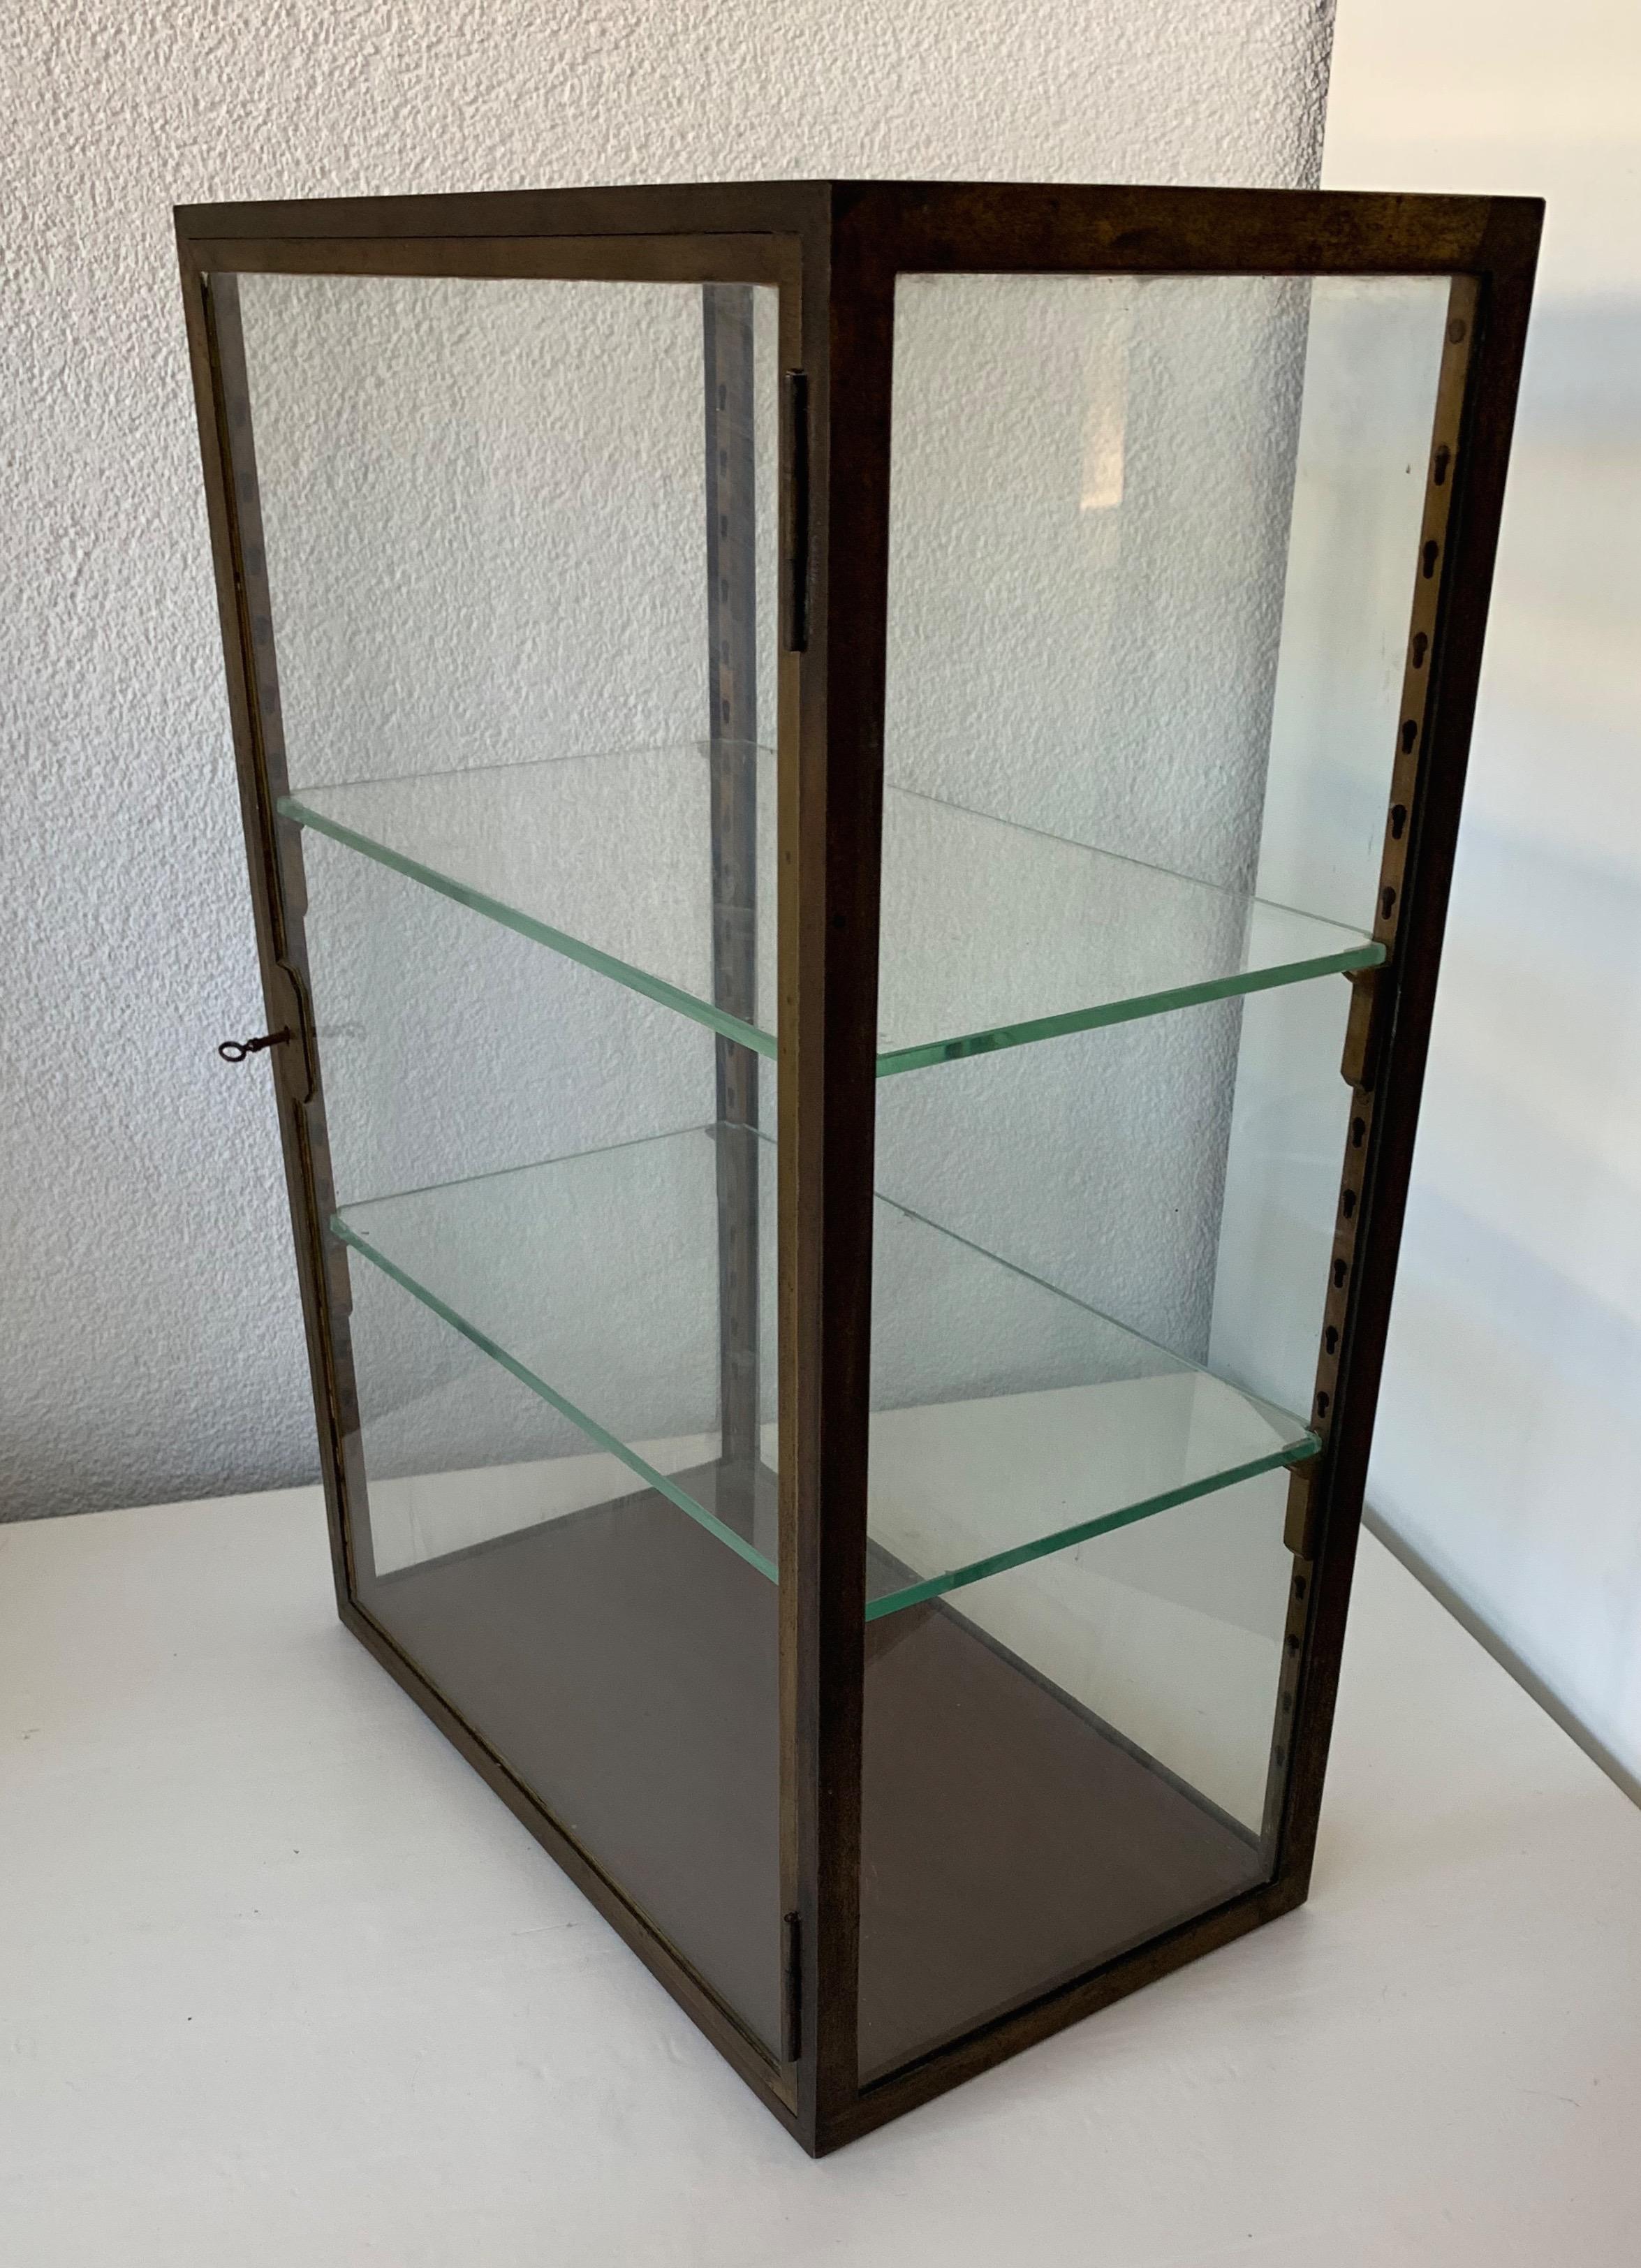 Top Quality Antique Brass & Glass Display Cabinet for Rolex / Jewelry Collection 6